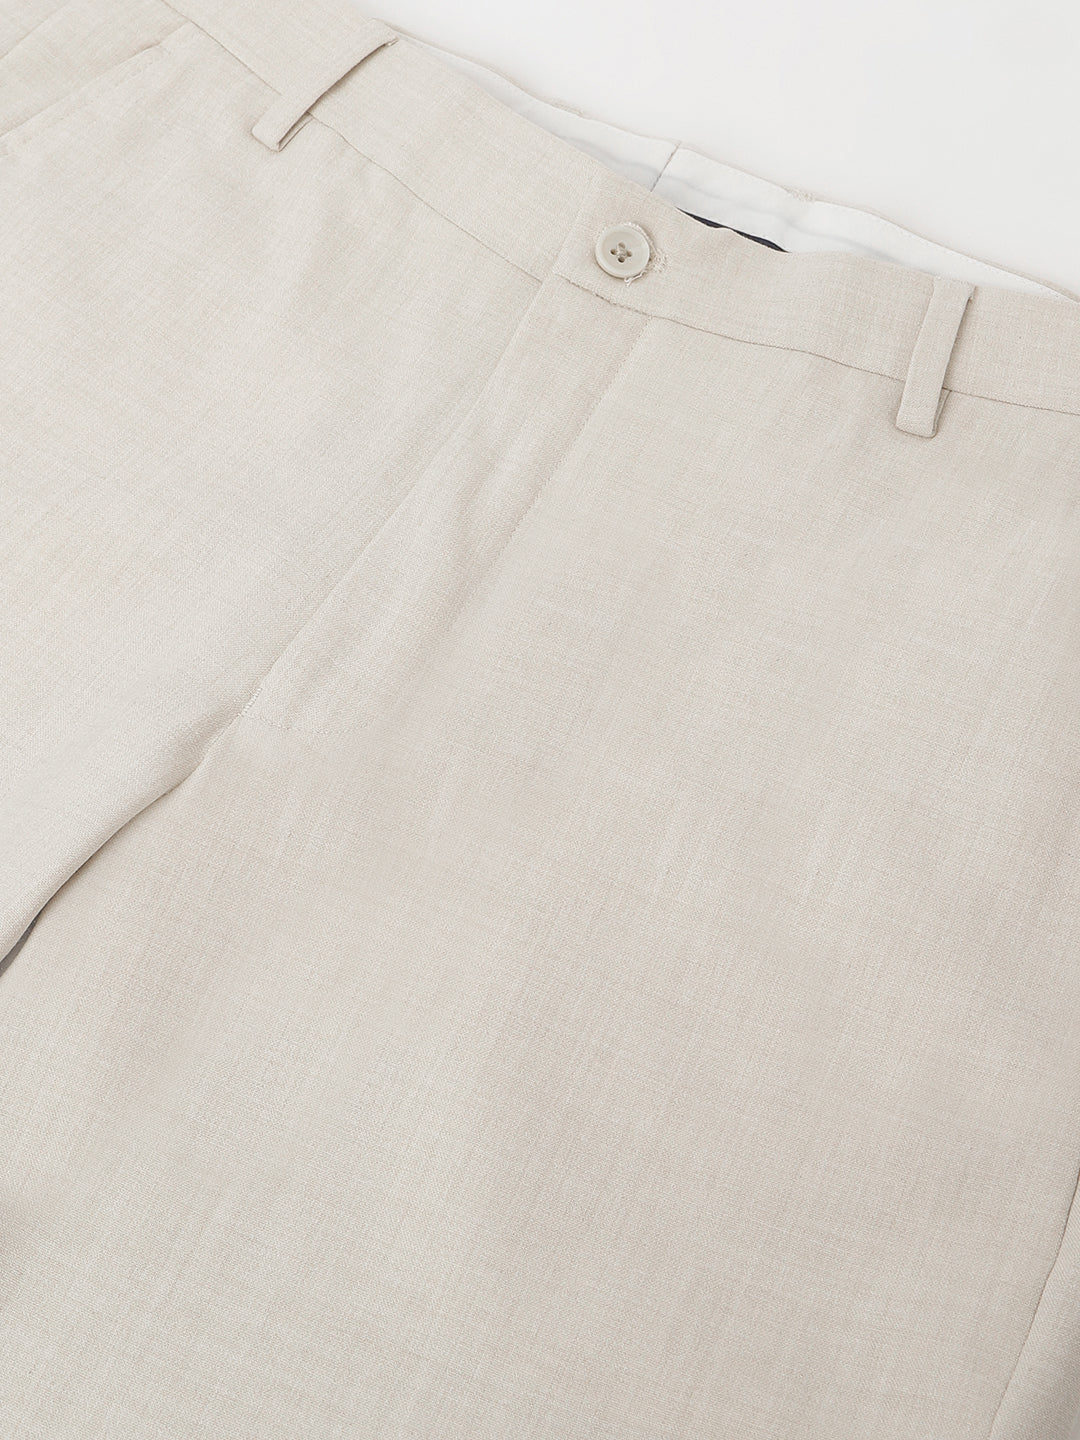 4-Way Stretch Formal Trousers in Ivory Sand - Slim Fit